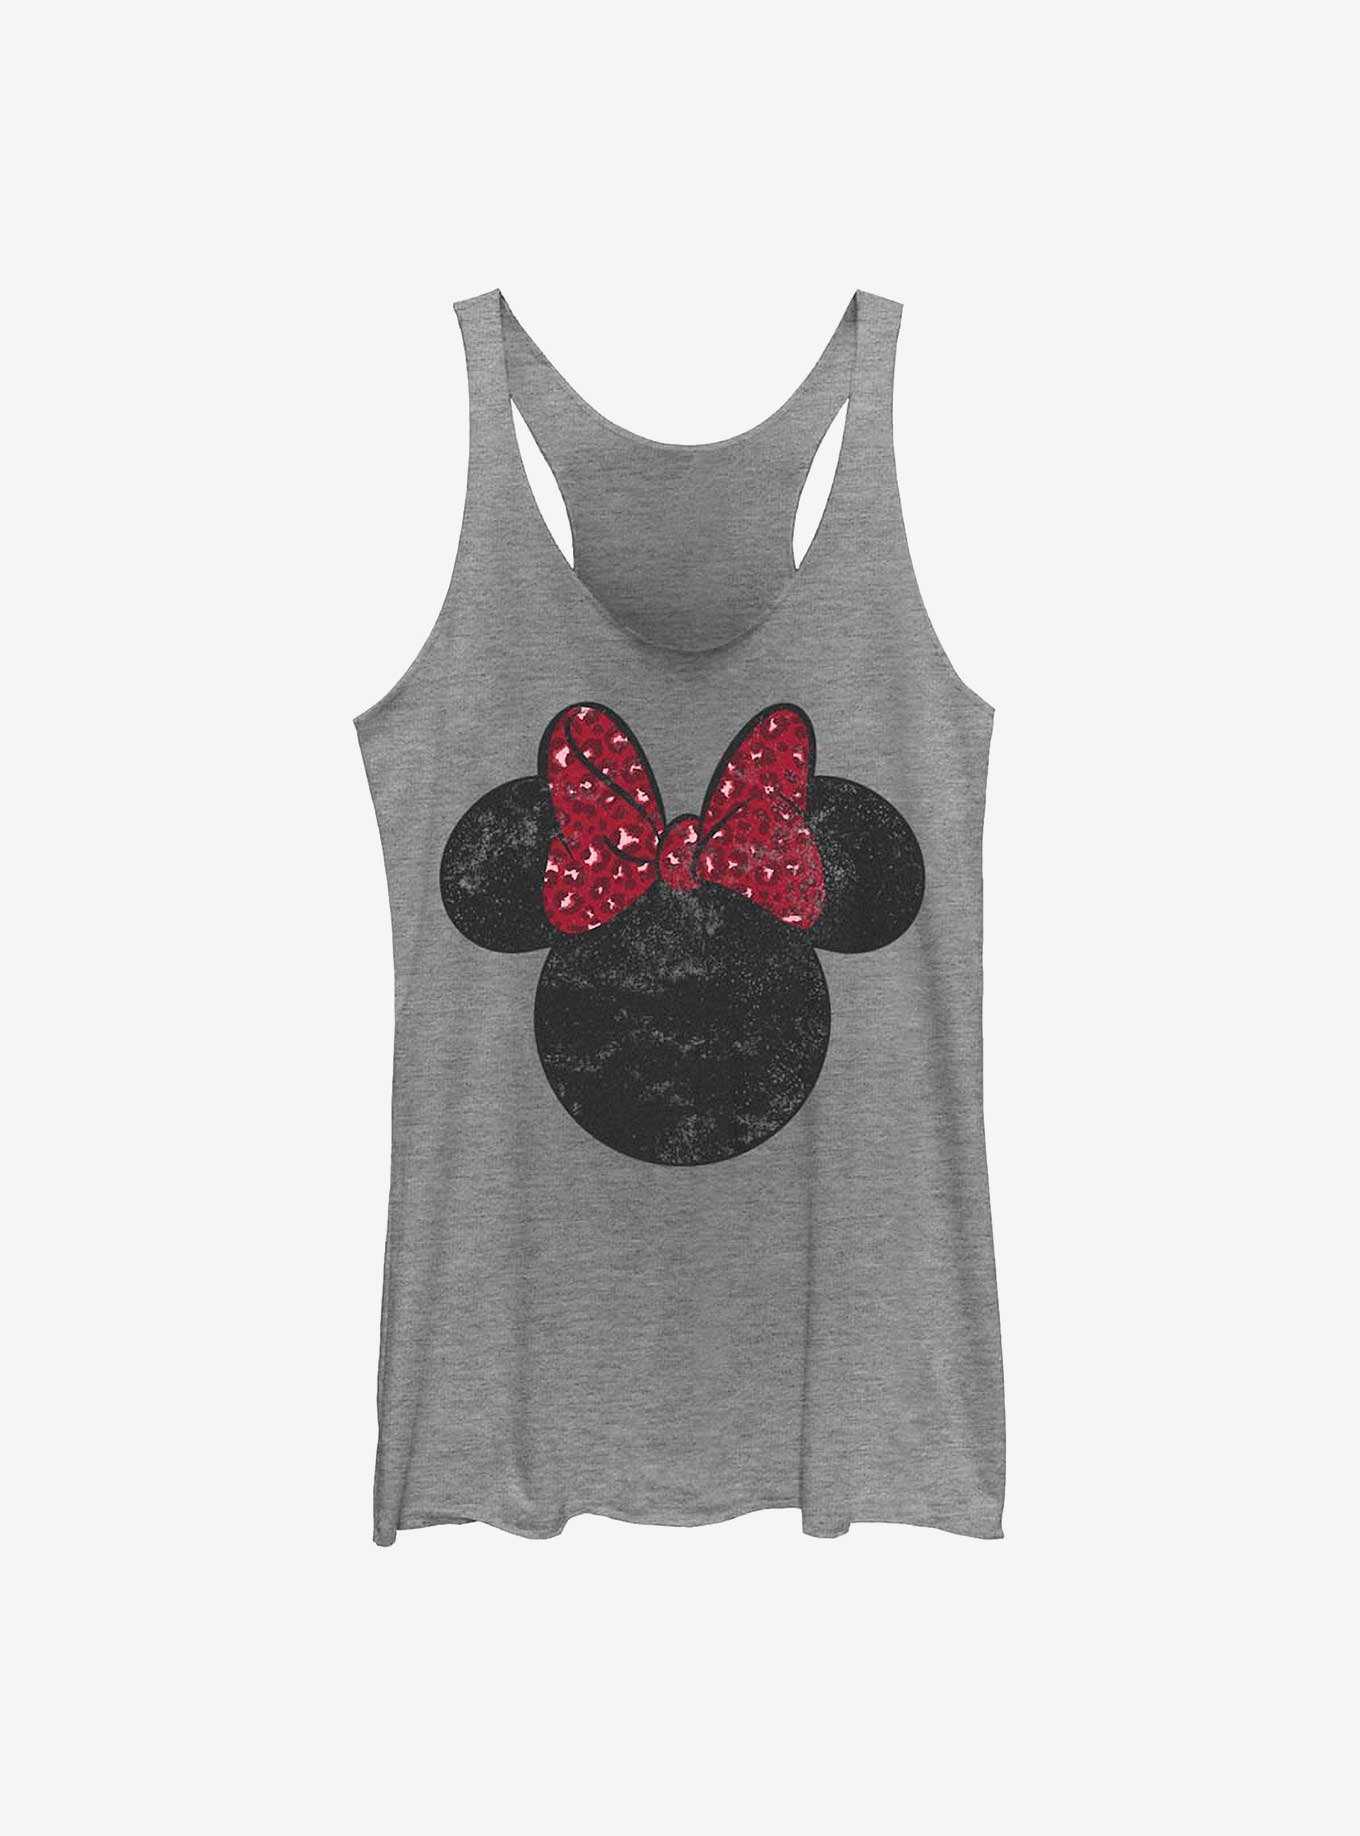 Aunt shirt Personalized Disney gift, Minnie Mouse ears and cute red bow,  Disney World family vacation trip Disney for  clothing store